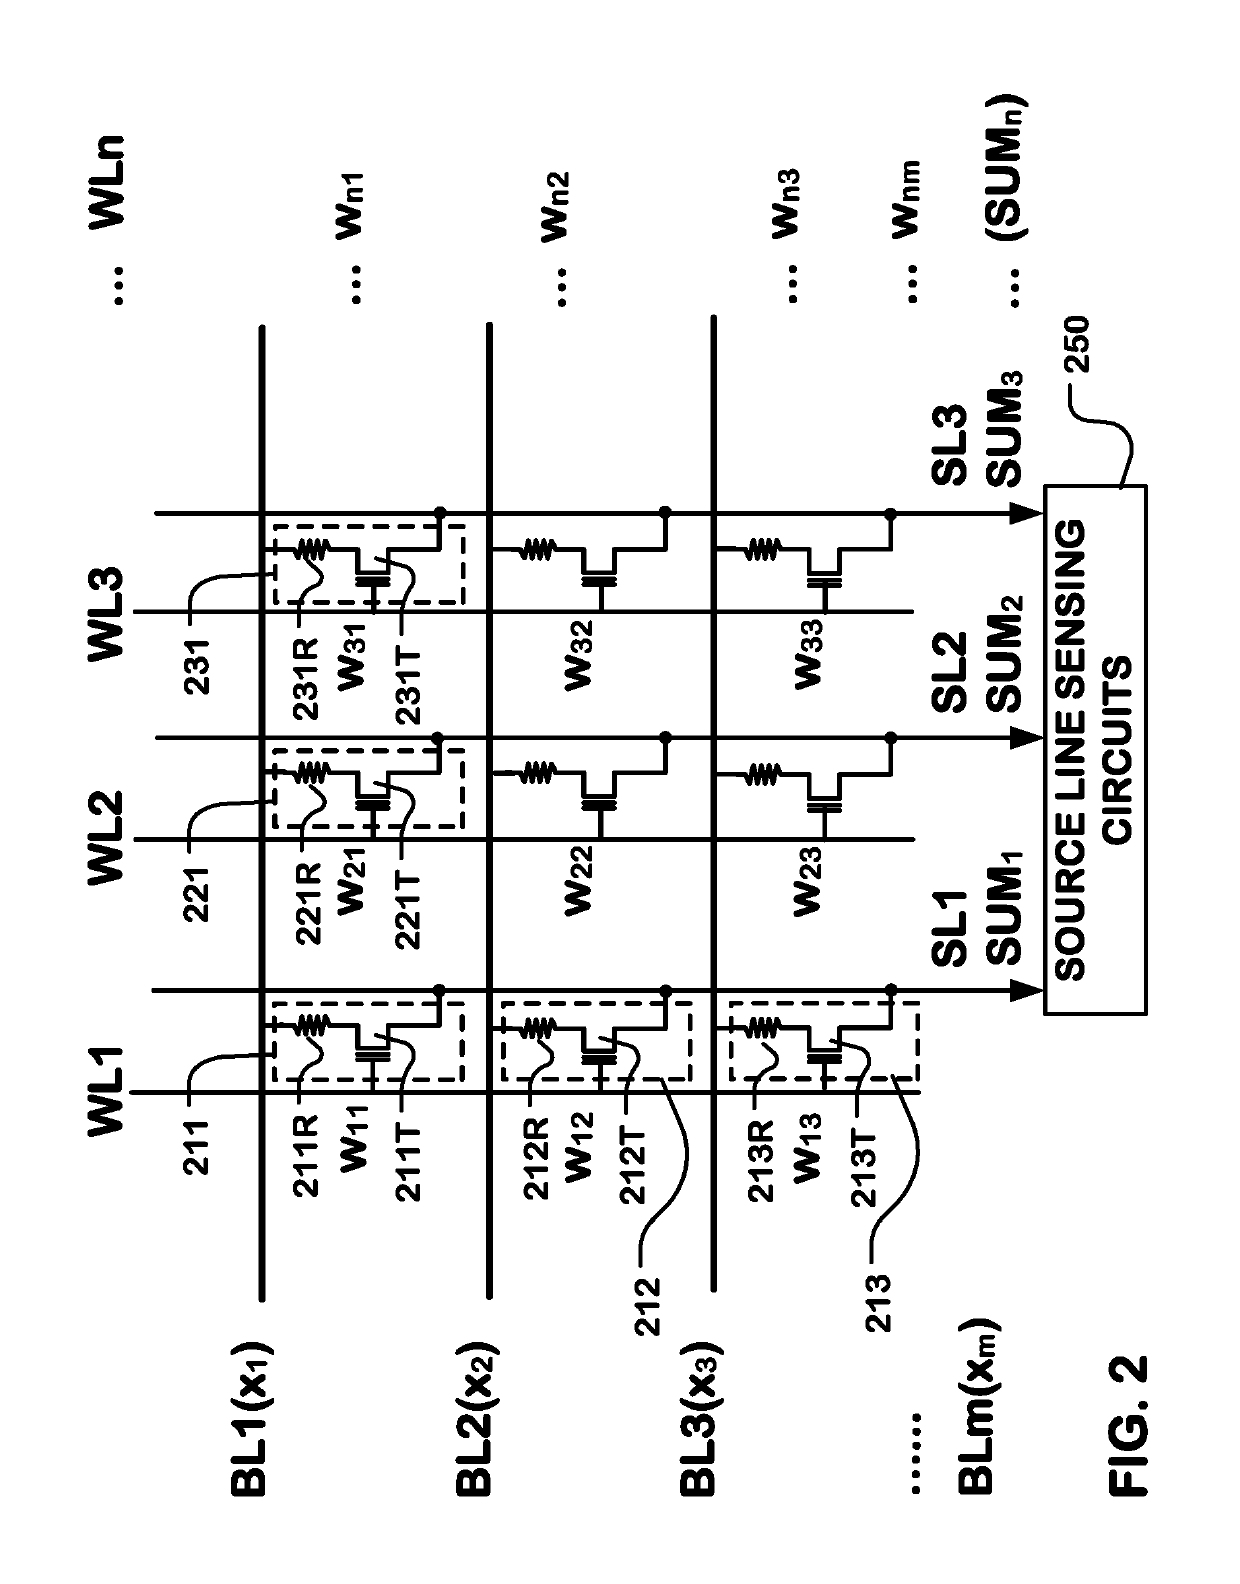 Device structure for neuromorphic computing system